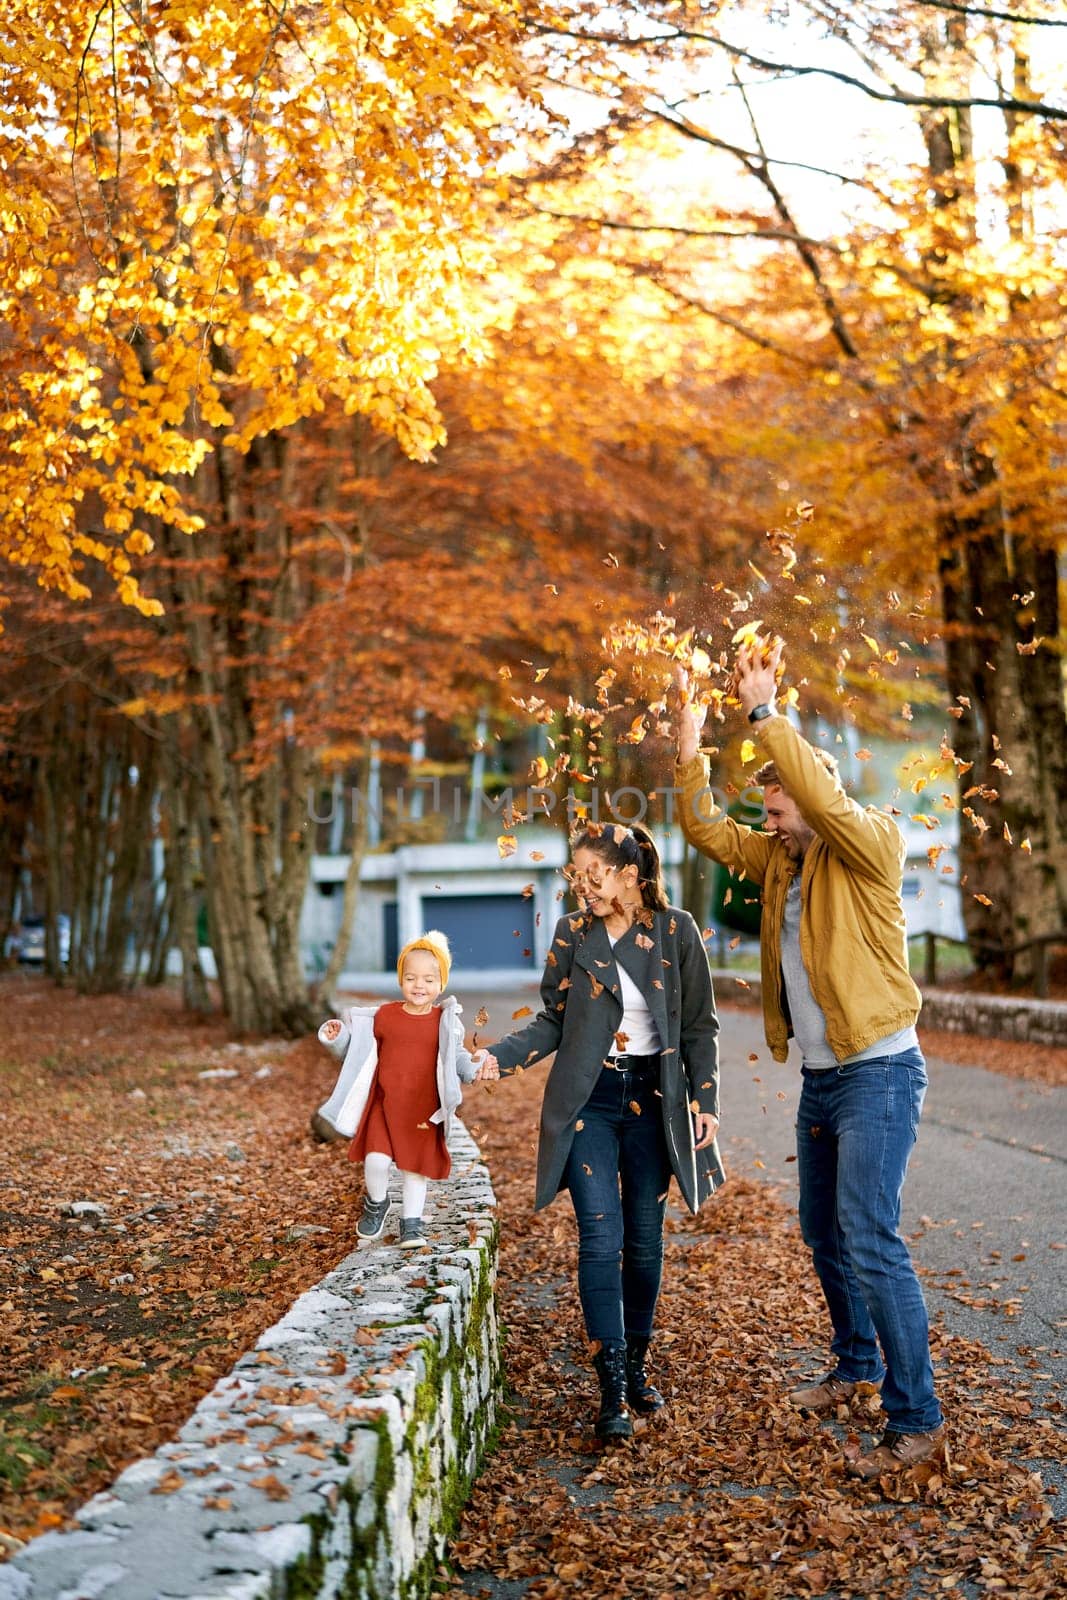 Dad sprinkles dry leaves on mom and little girl walking through the autumn forest. High quality photo